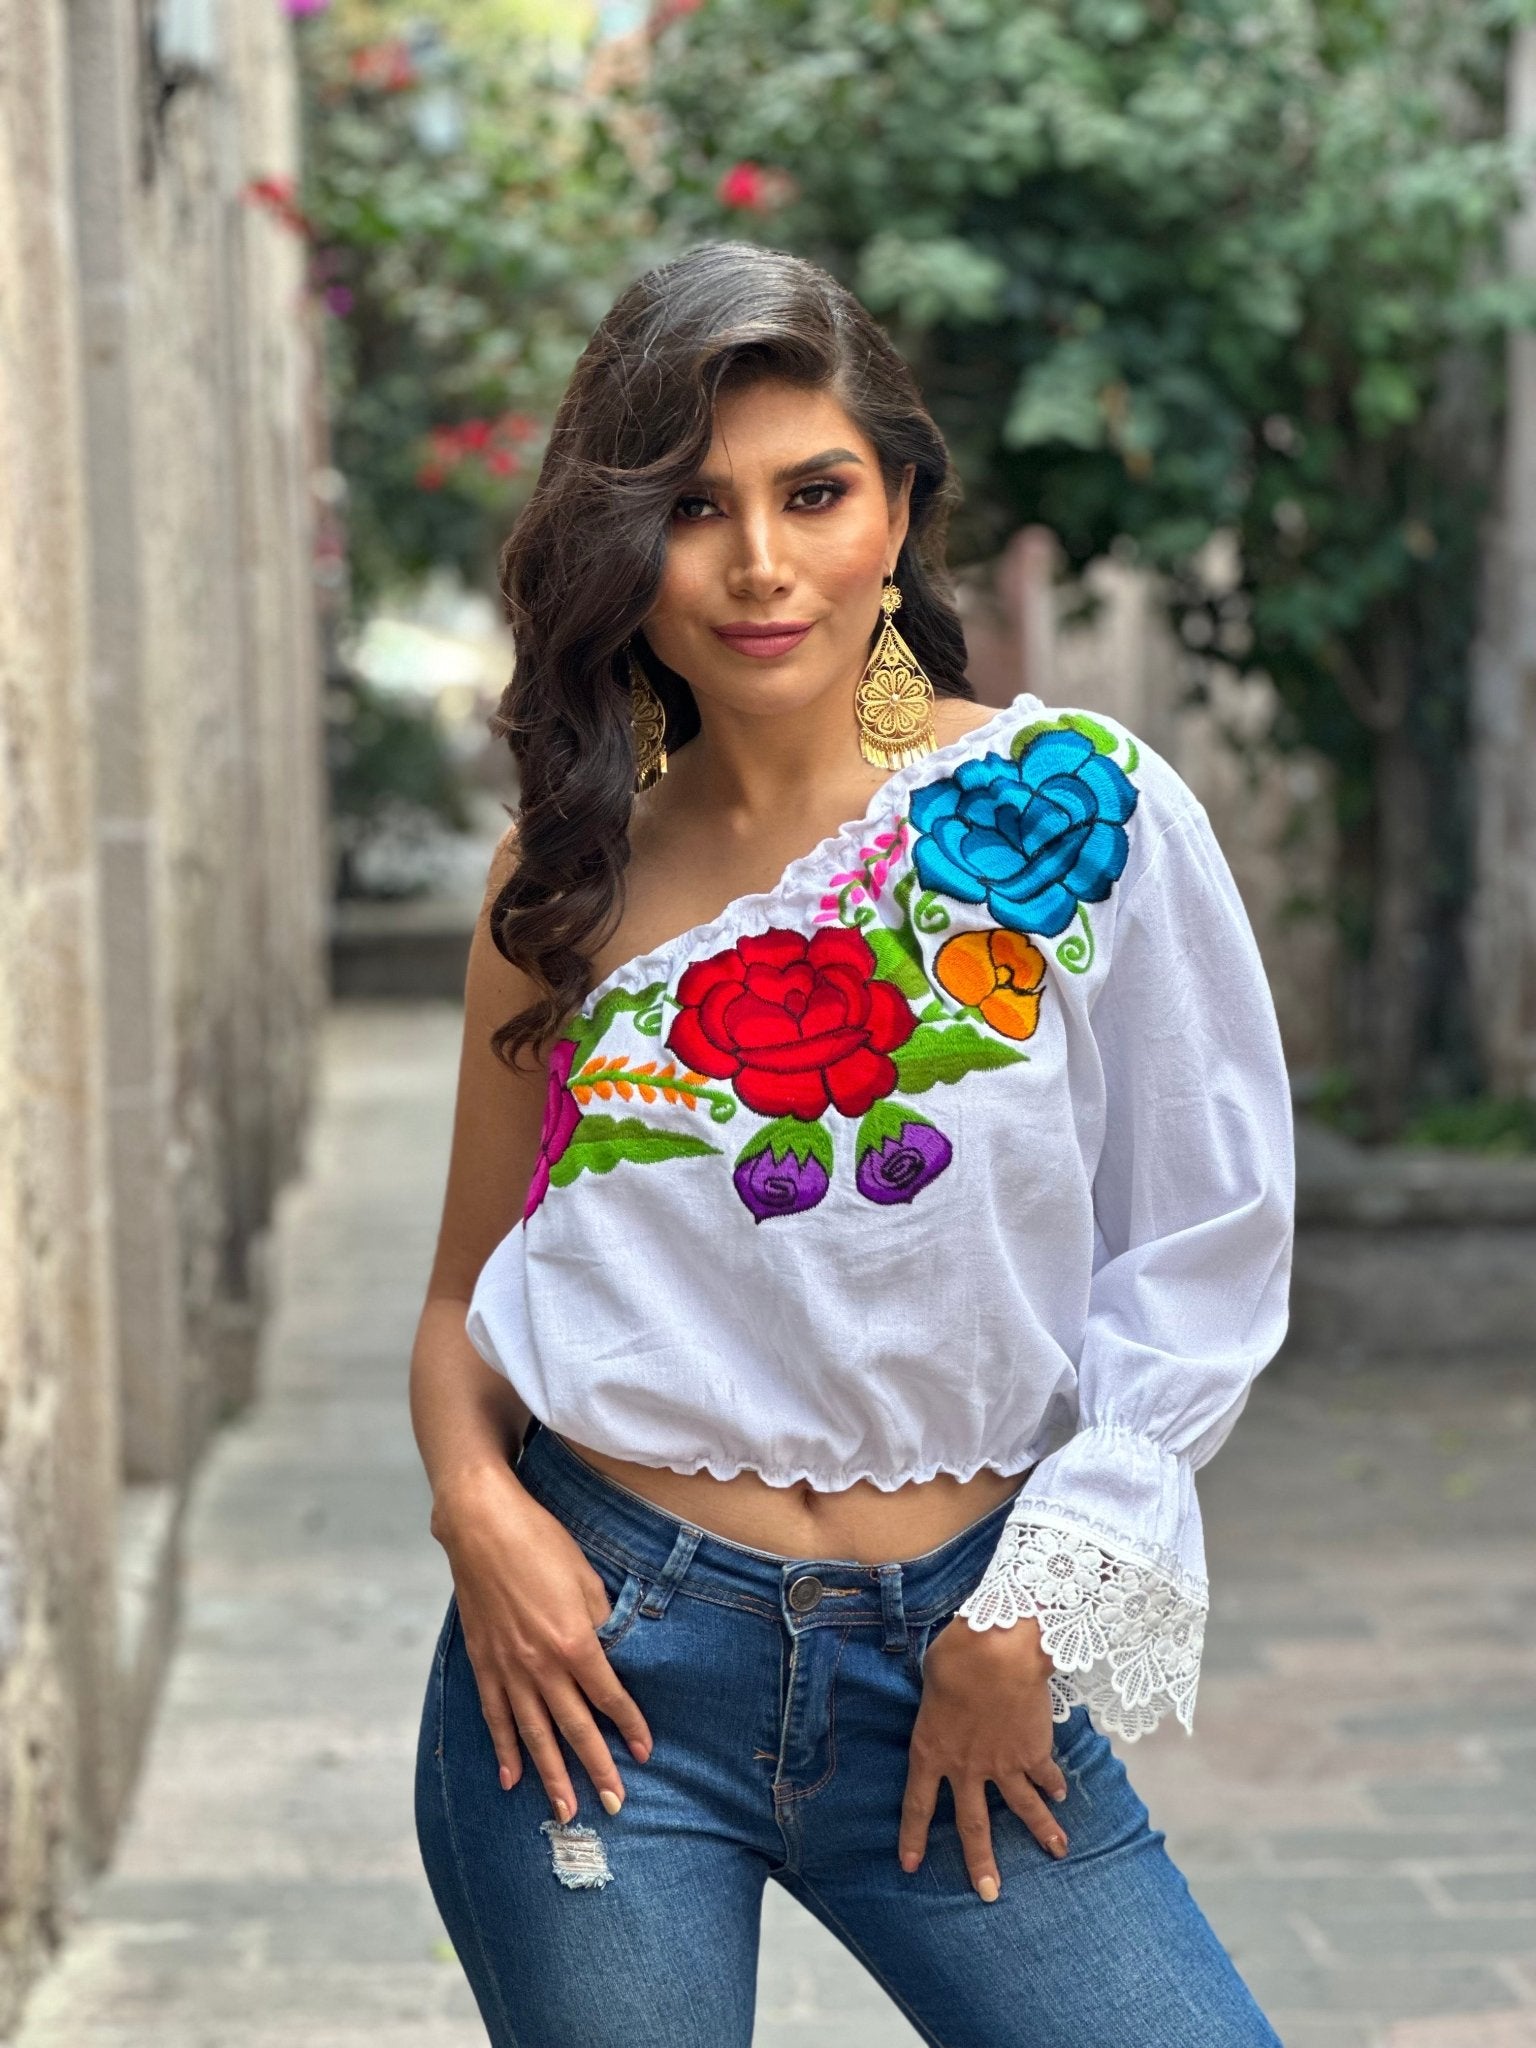 Mexican Embroidered Floral One Shoulder Artisanal Crop Top. Zulema Deluxe Crop Top. - Solei Store